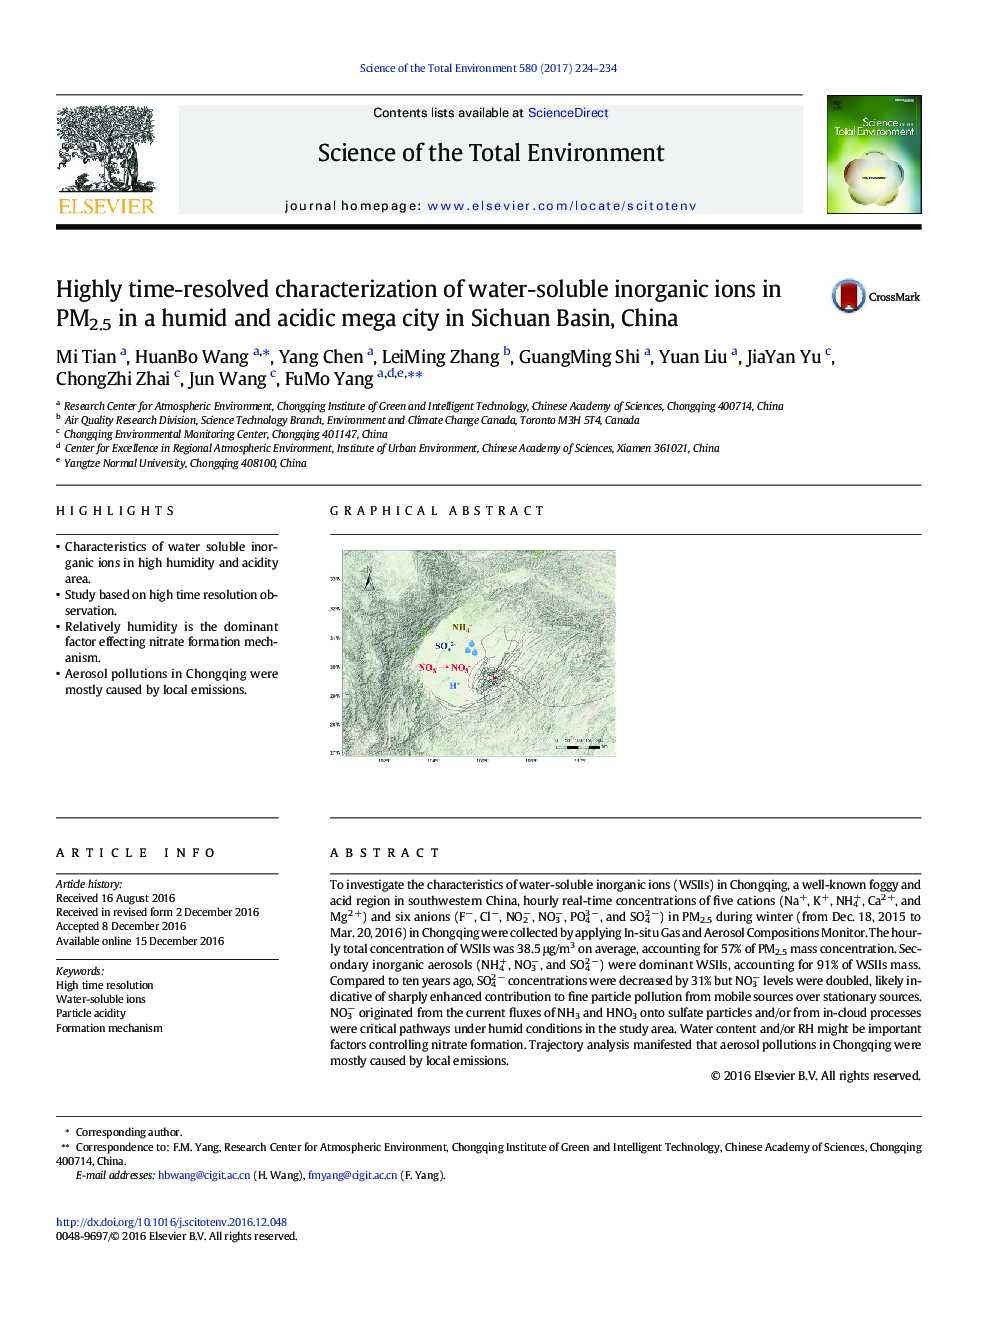 Highly time-resolved characterization of water-soluble inorganic ions in PM2.5 in a humid and acidic mega city in Sichuan Basin, China